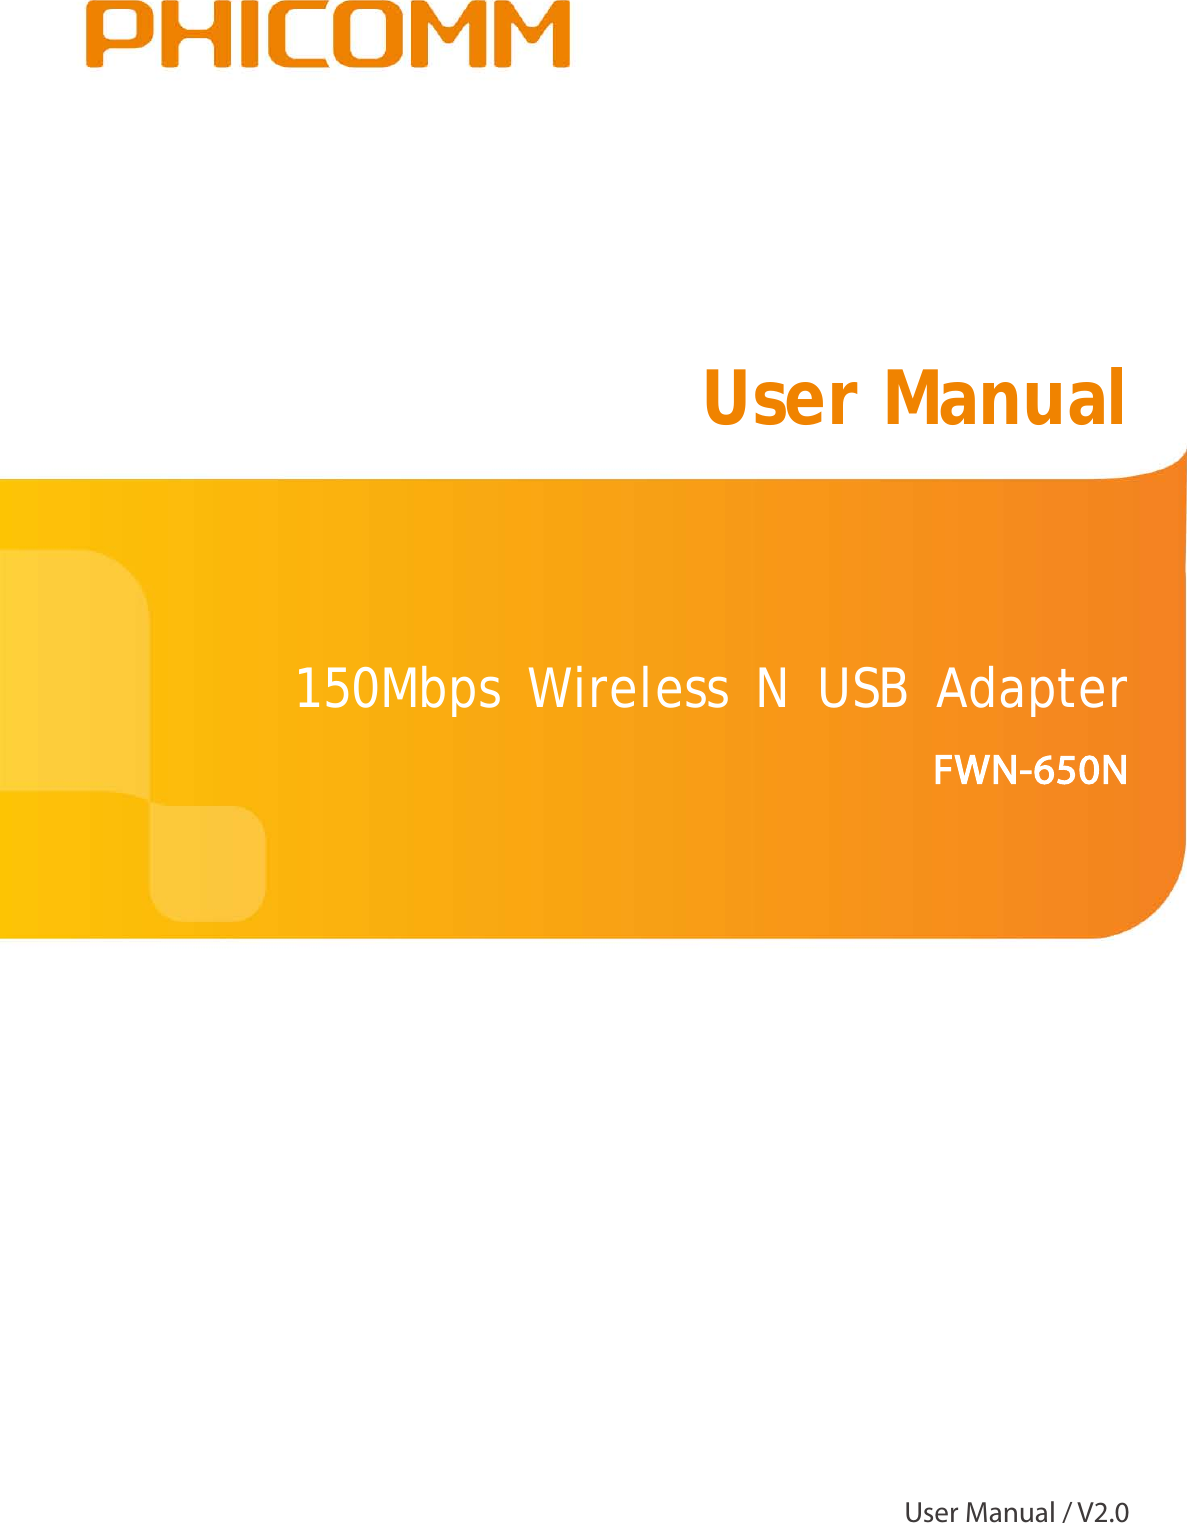                                                            150Mbps Wireless N USB Adapter  FWN-650N  User Manual  User Manual / V2.0 